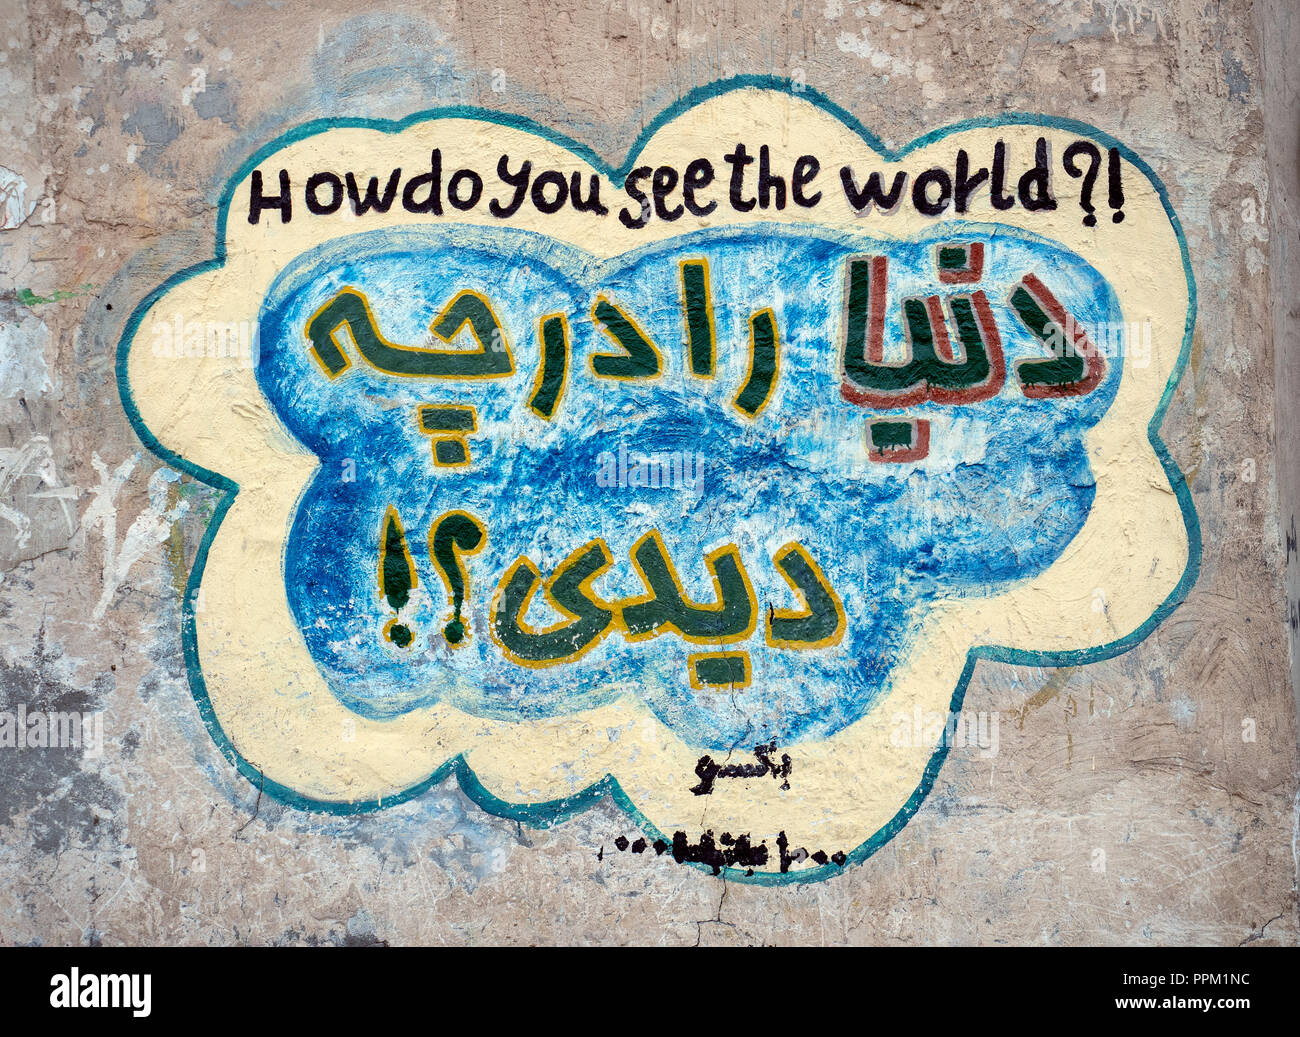 Nain, Iran - March 6, 2017 : 'how do you see the world ?' mural writing in persian language Stock Photo